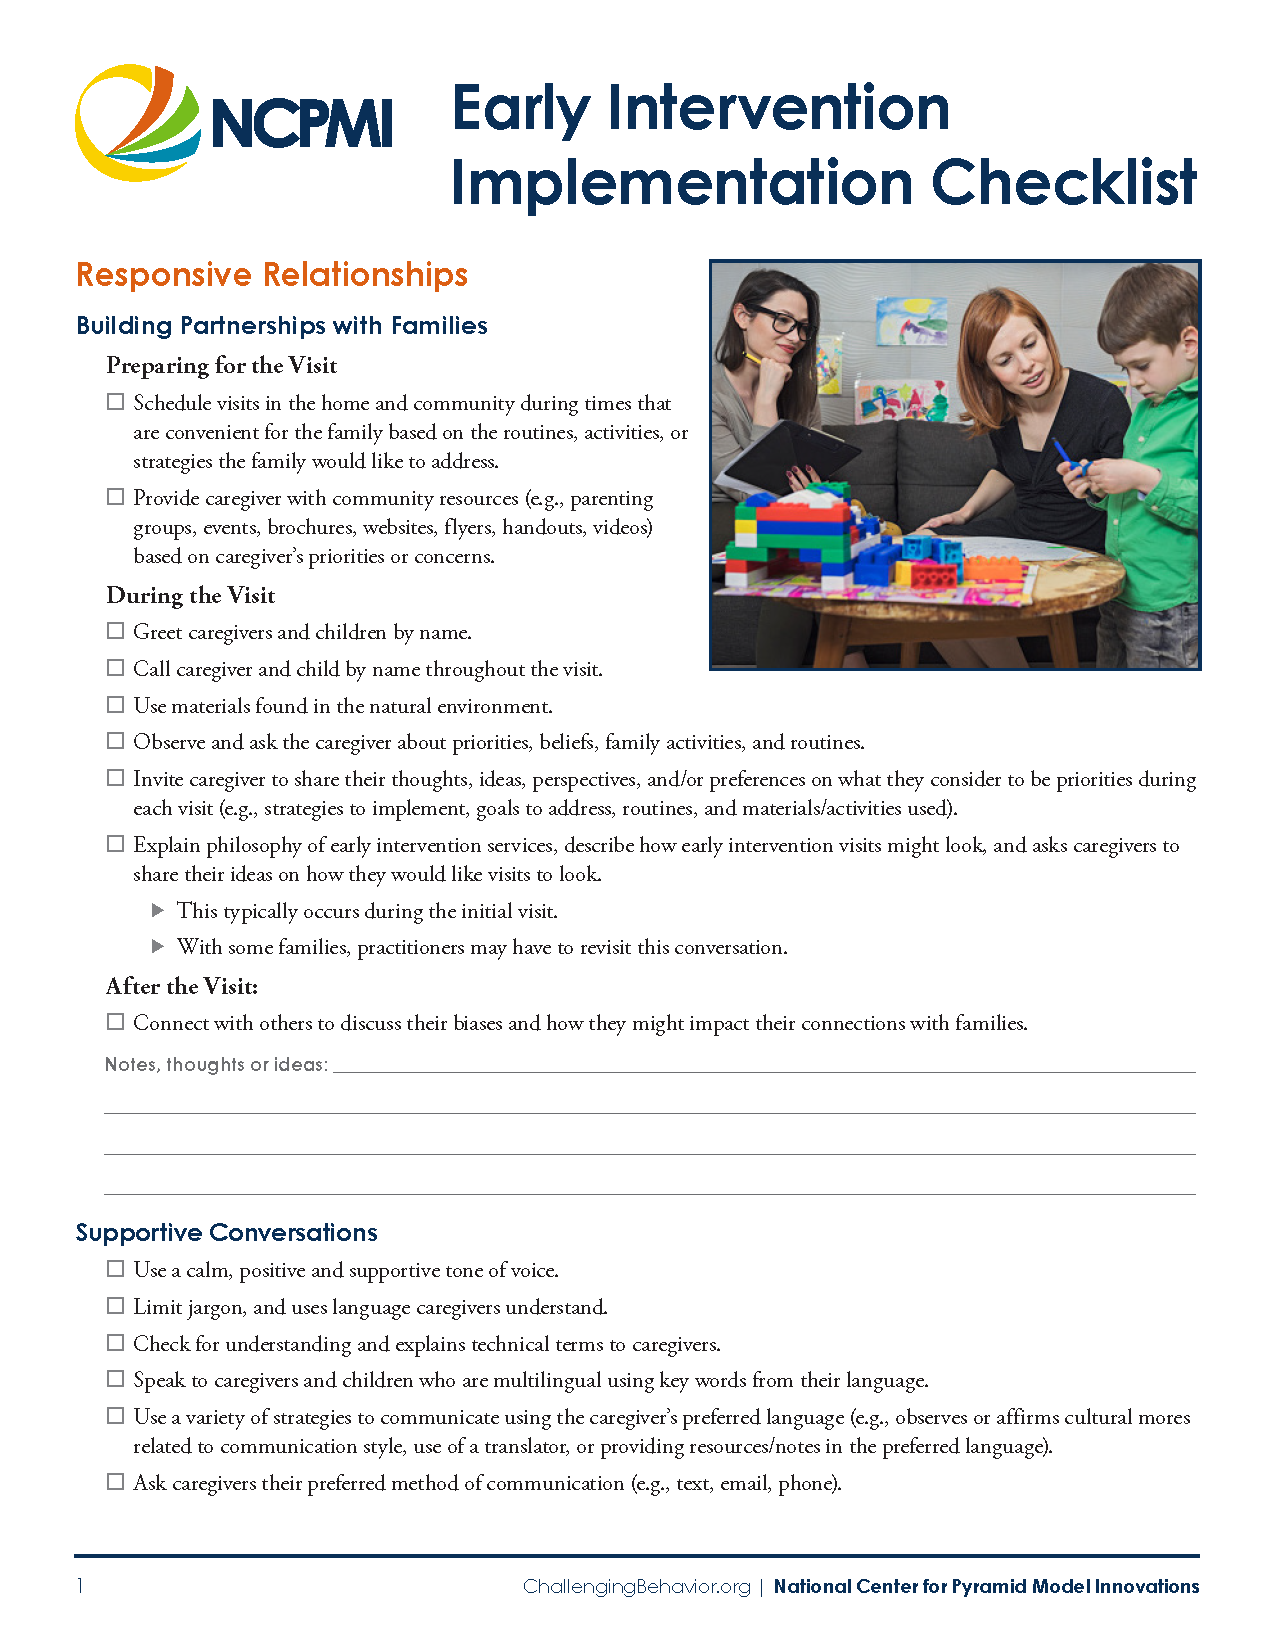 Early Intervention Implementation Checklist